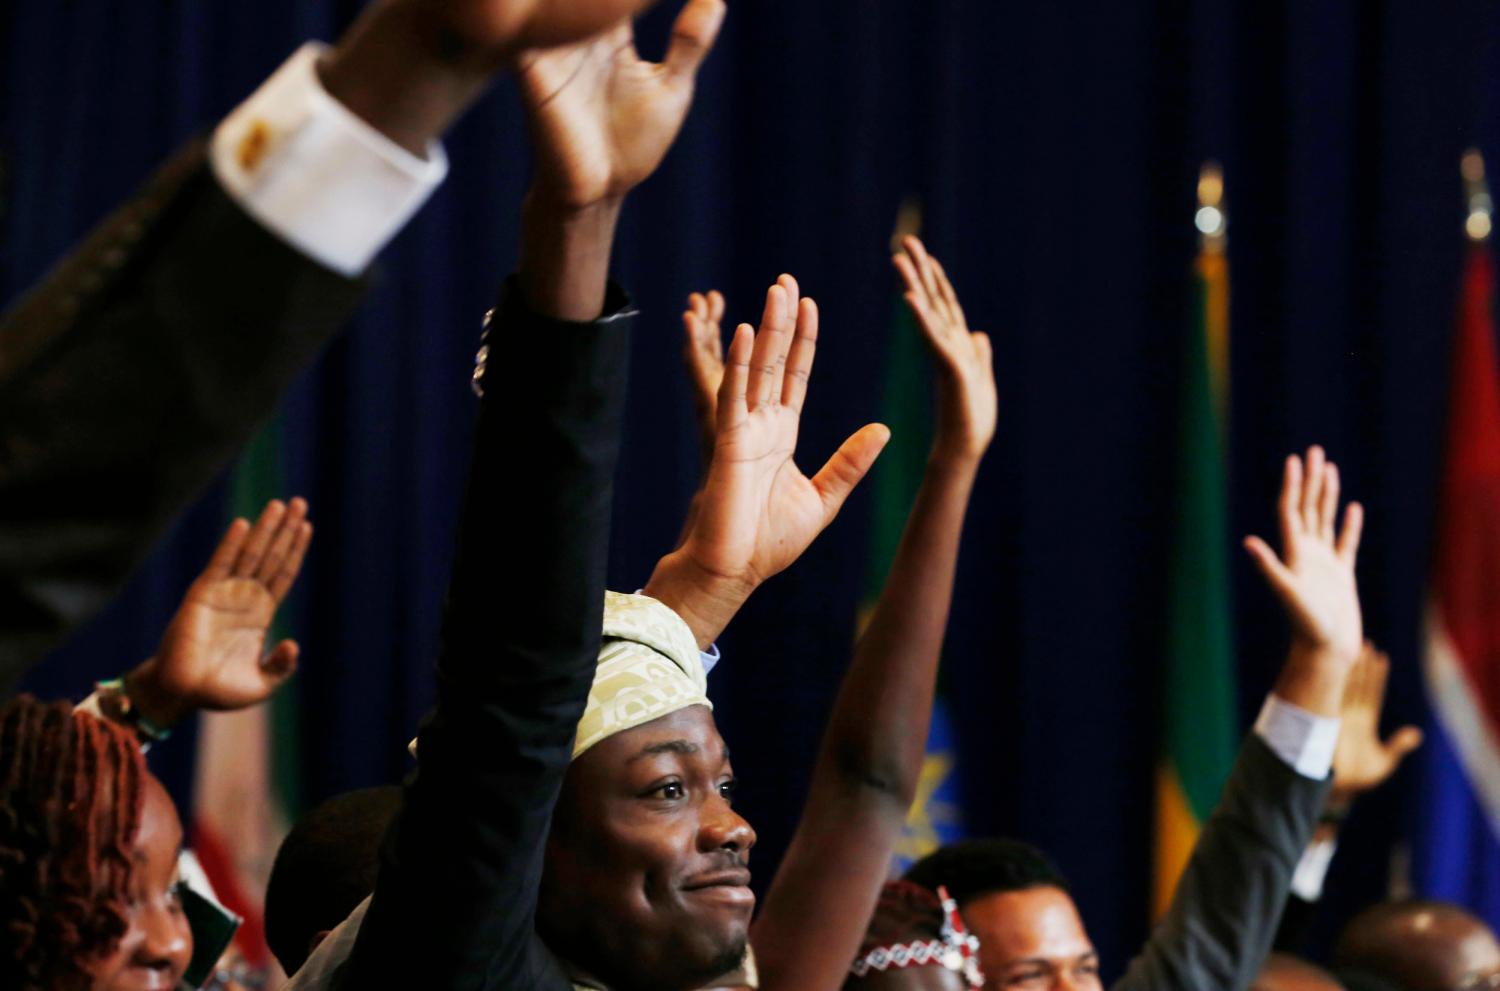 Vital Sounouvou (C) of Benin, raises his hand trying to be called on from U.S. President Barack Obama, at the Summit of the Washington Fellowship for Young African Leaders at the Omni Shoreham Hotel in Washington, July 28, 2014.     REUTERS/Larry Downing   (UNITED STATES - Tags: POLITICS EDUCATION) - GM1EA7T017E01